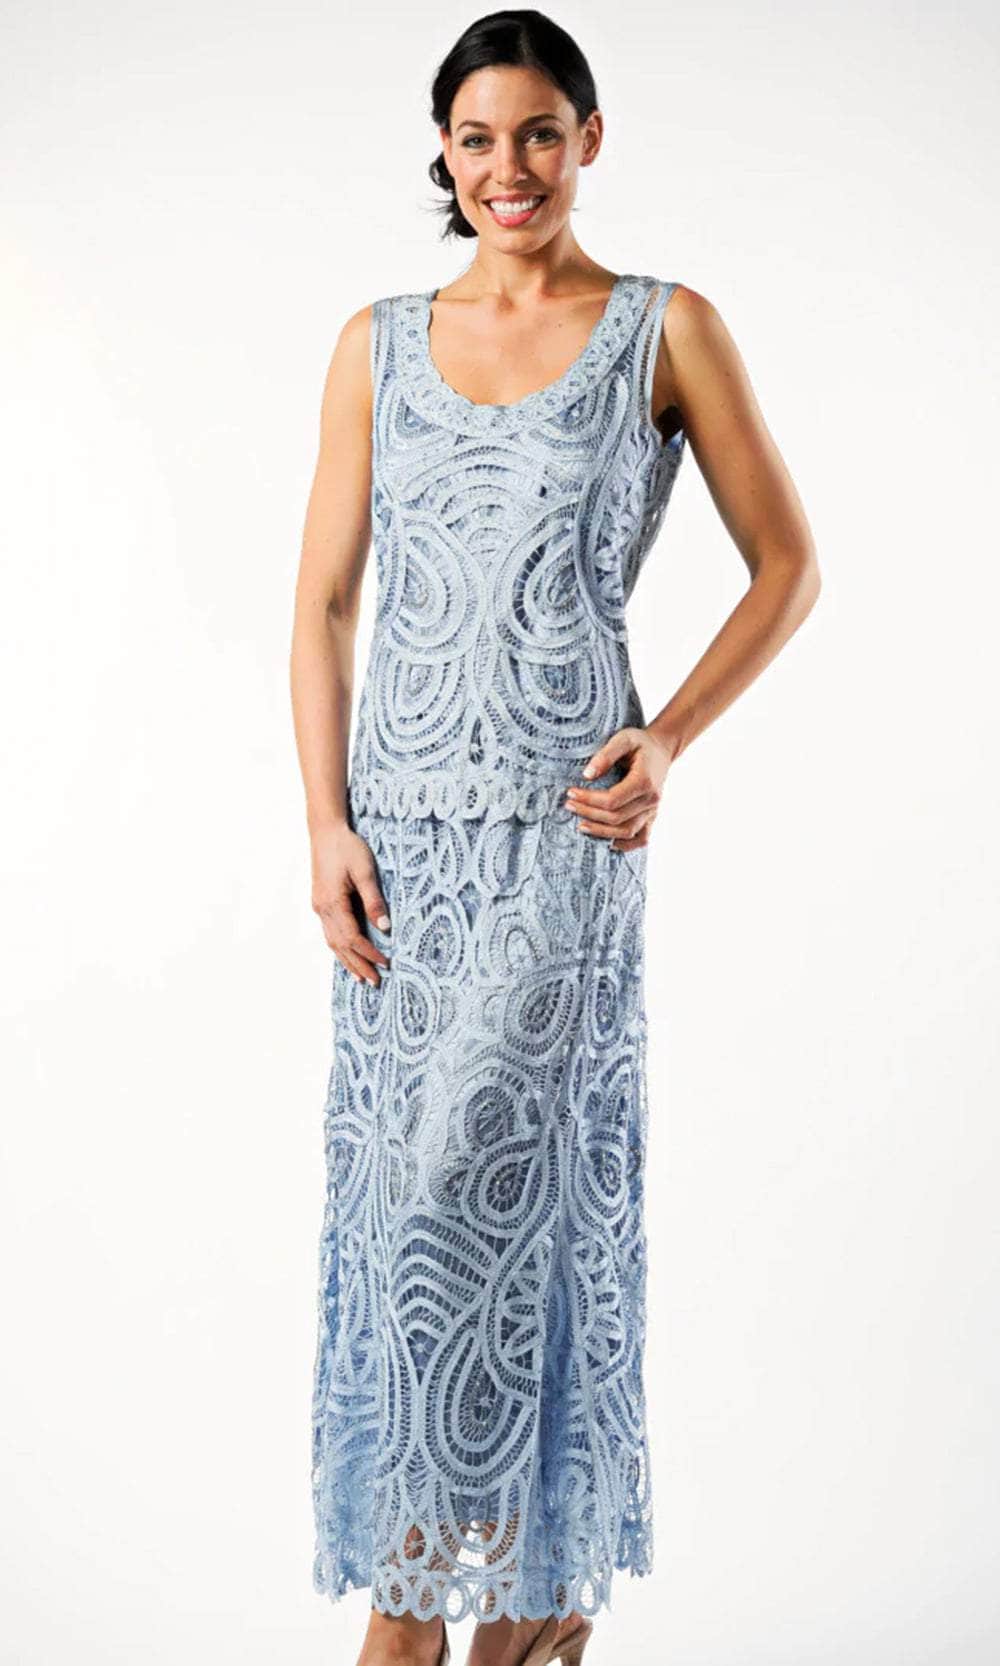 Soulmates D7051 - Three Piece Paisley Jacket Tank And Skirt Set Mother of the Bride Dresses